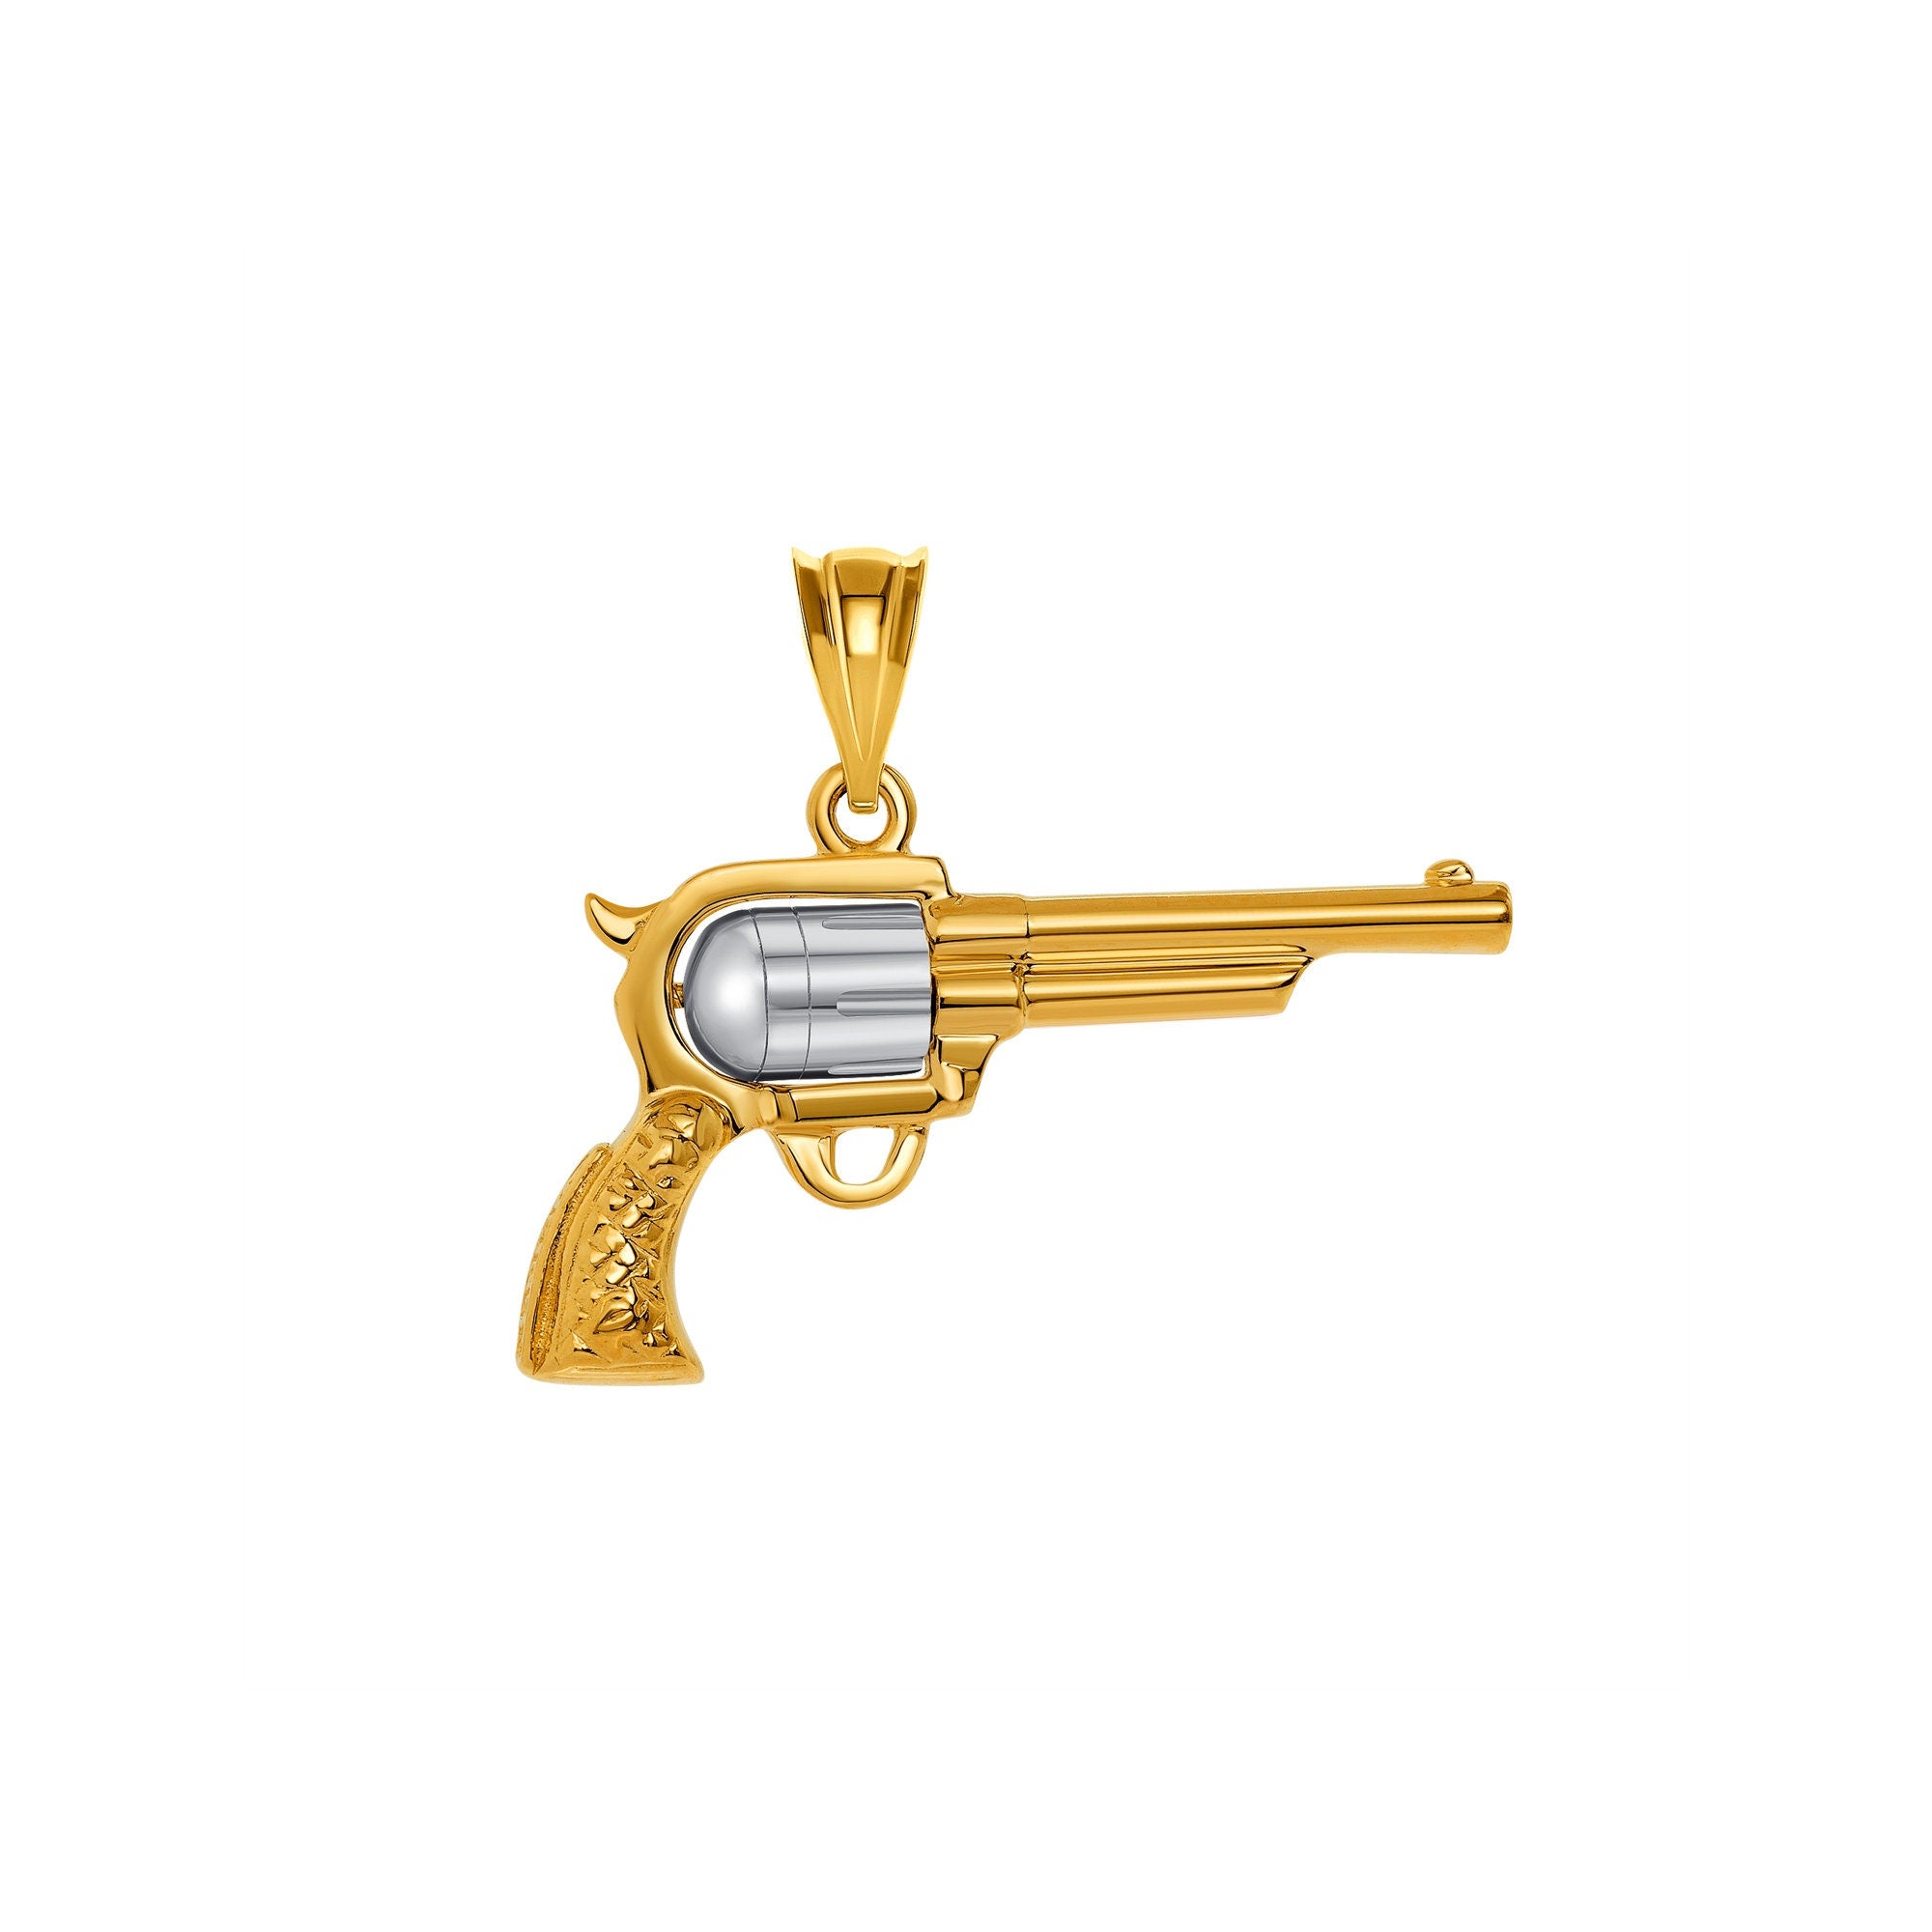 14k solid gold two tone 3 Dimensional pistol pendant, Revolver with spinning barrel